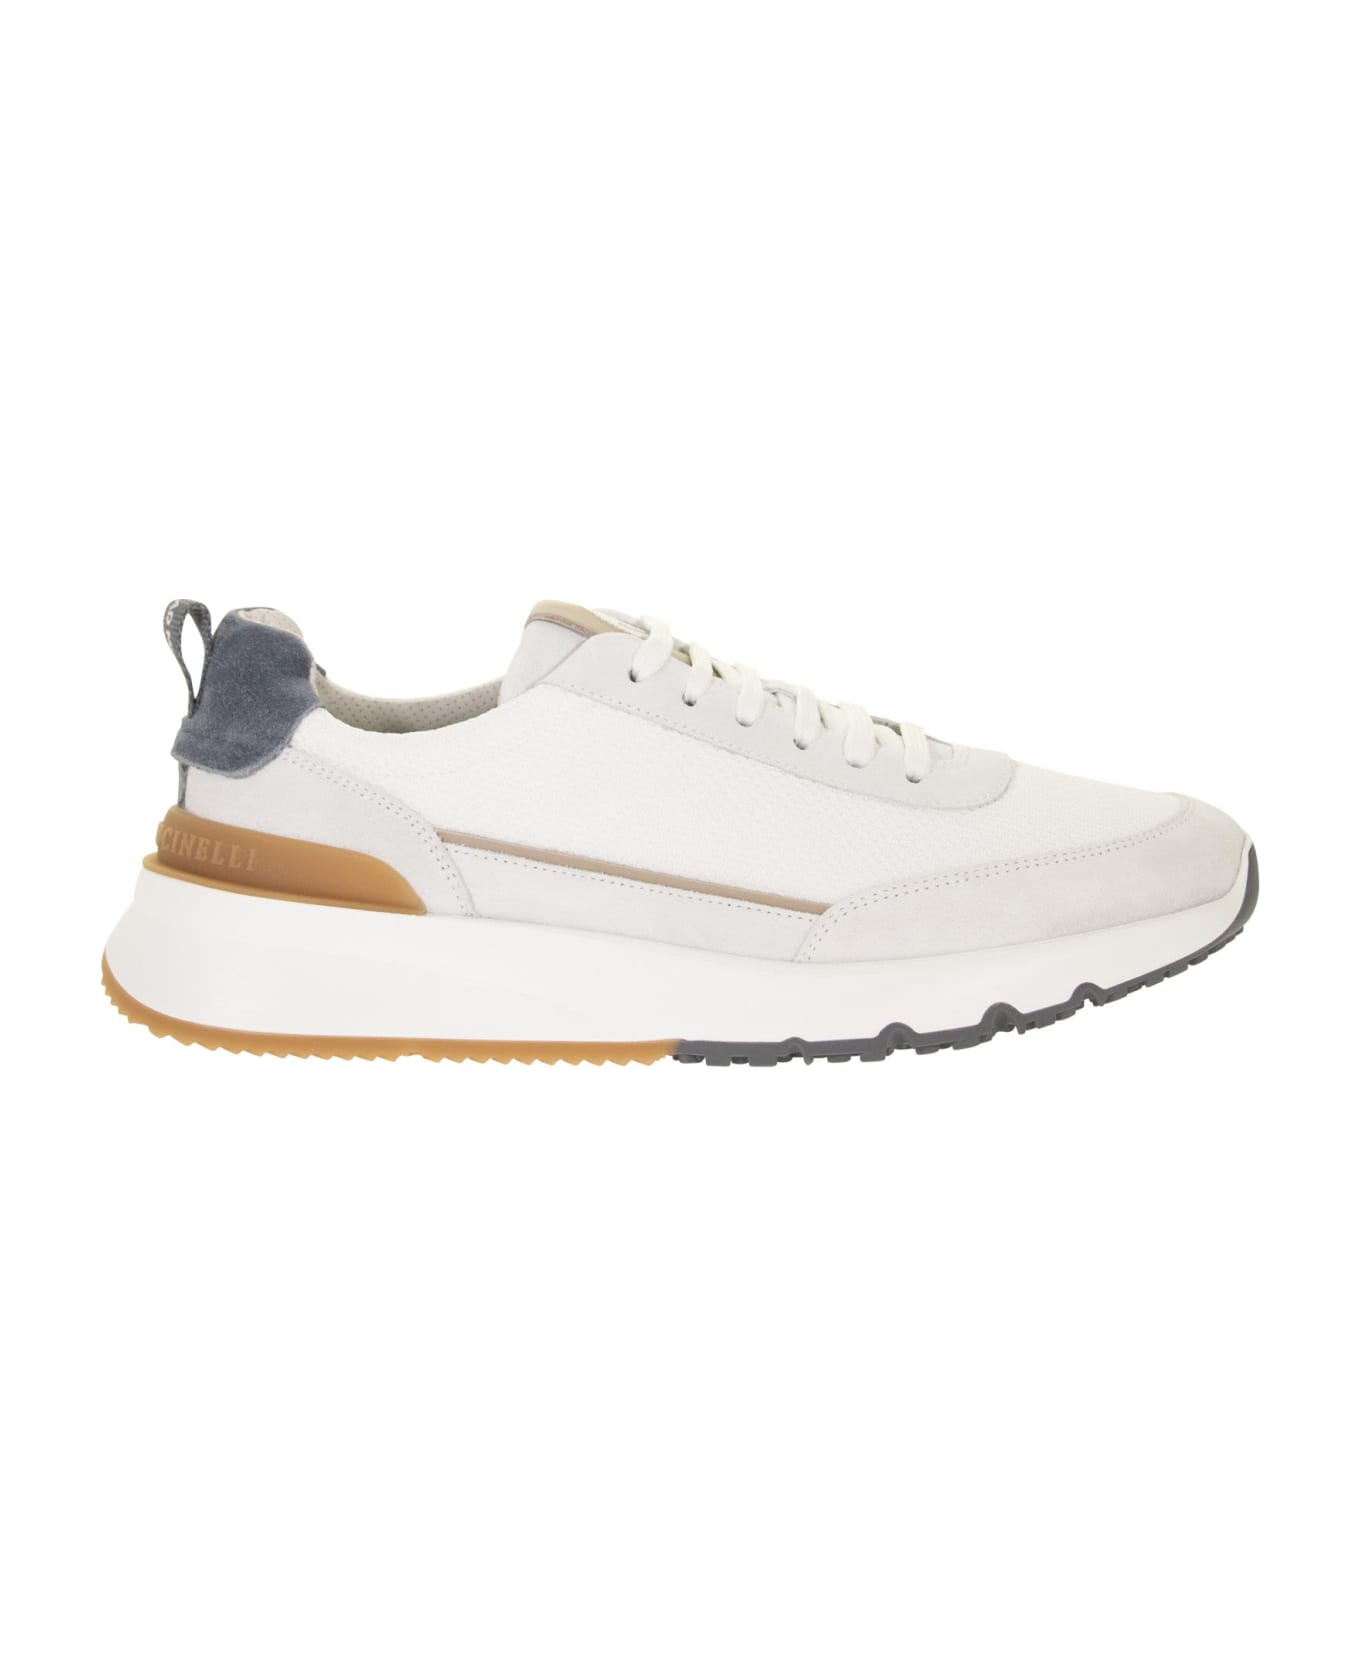 Brunello Cucinelli Texture Fabric And Washed Suede Runners - White